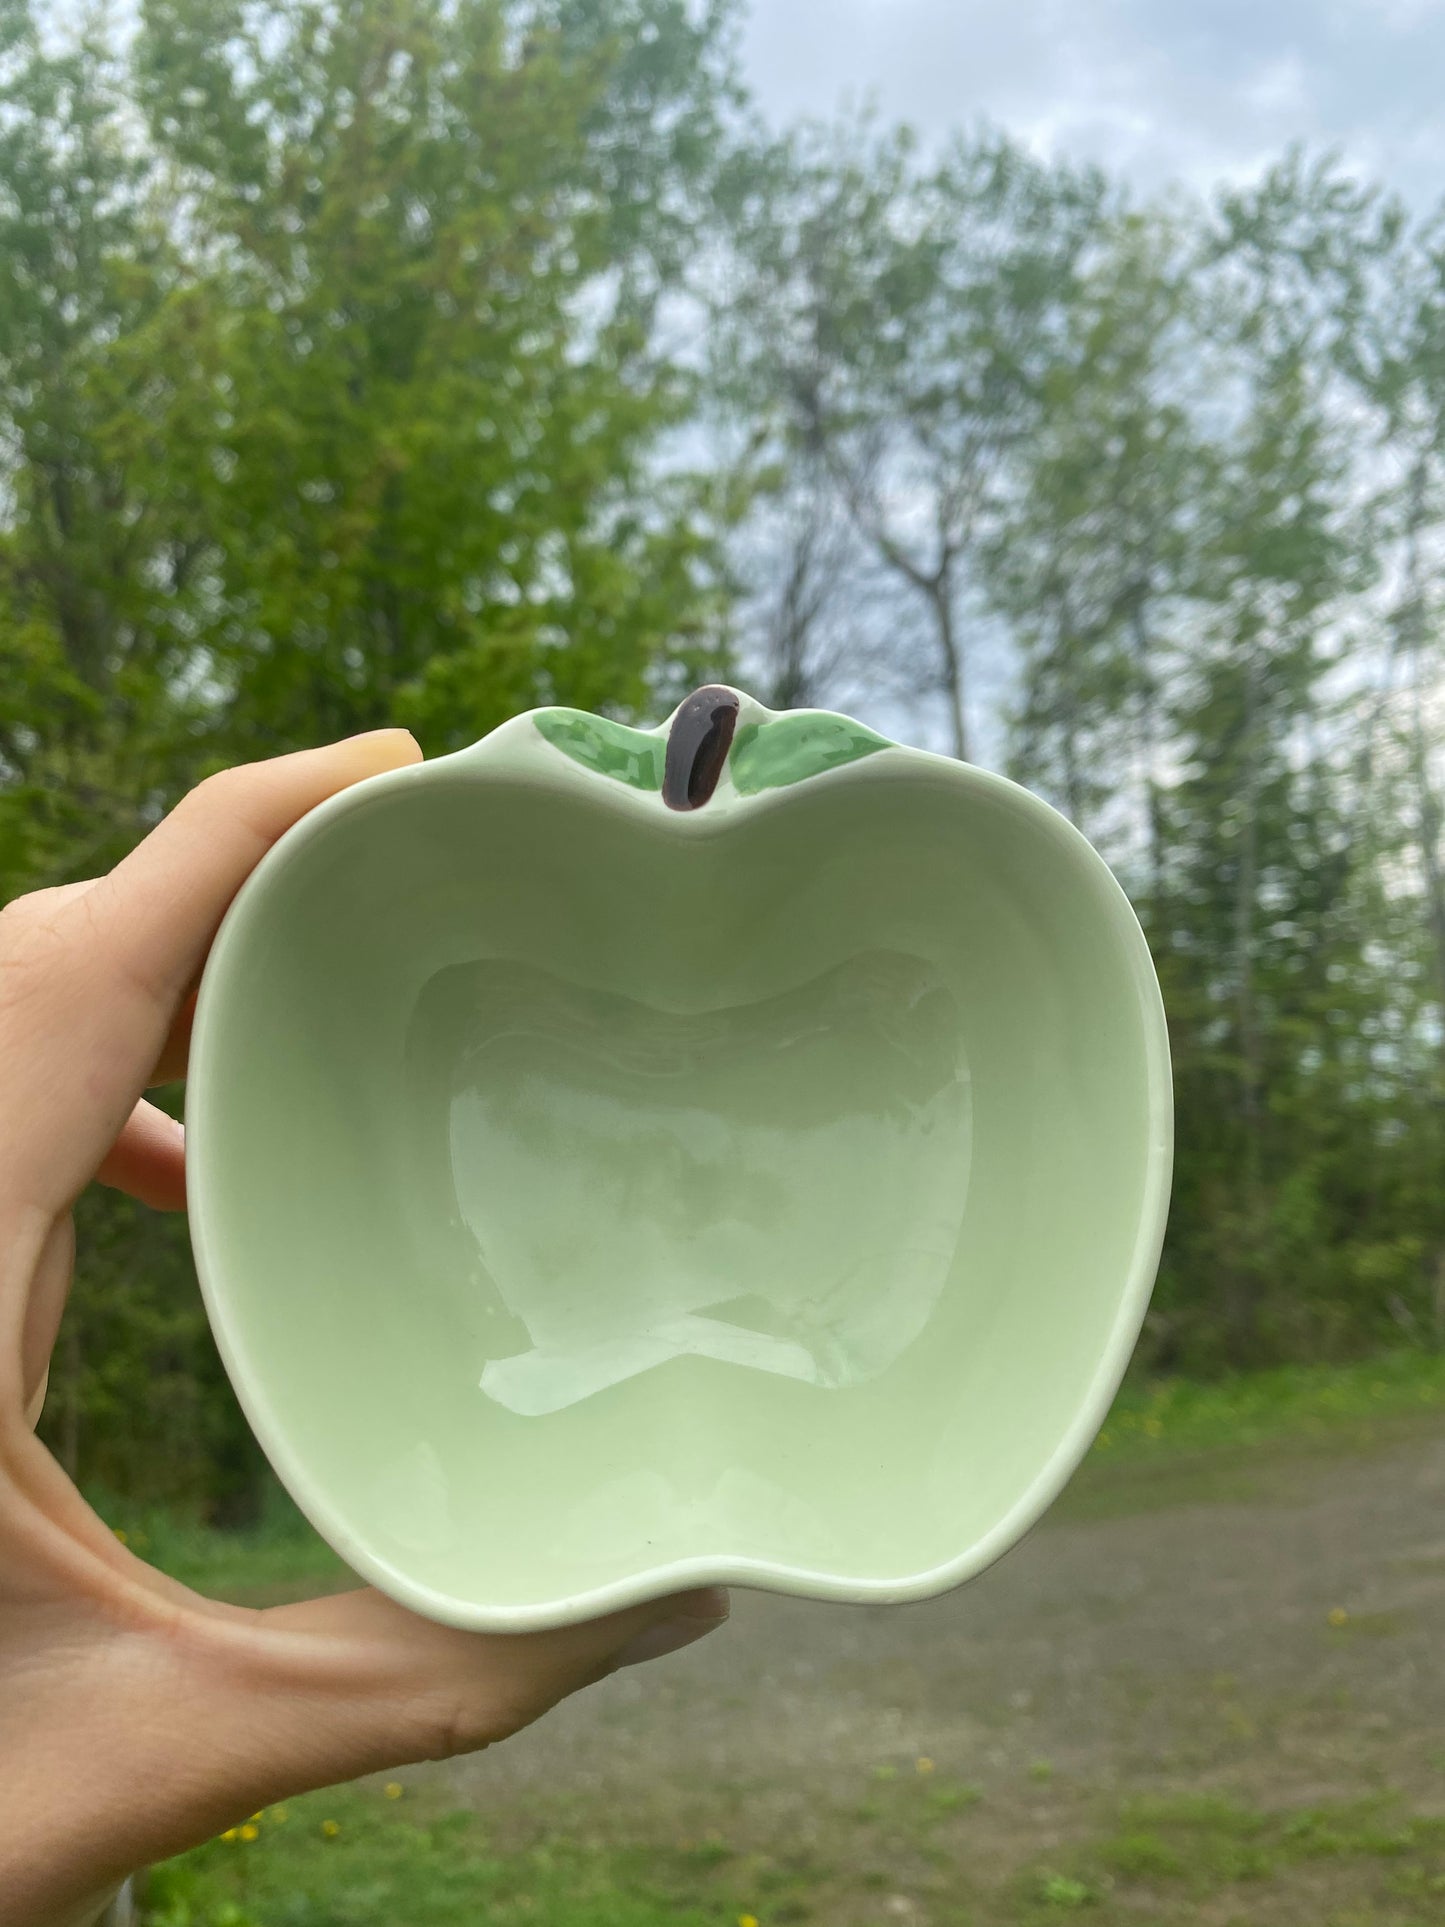 Apple shaped bowl - painted by hand